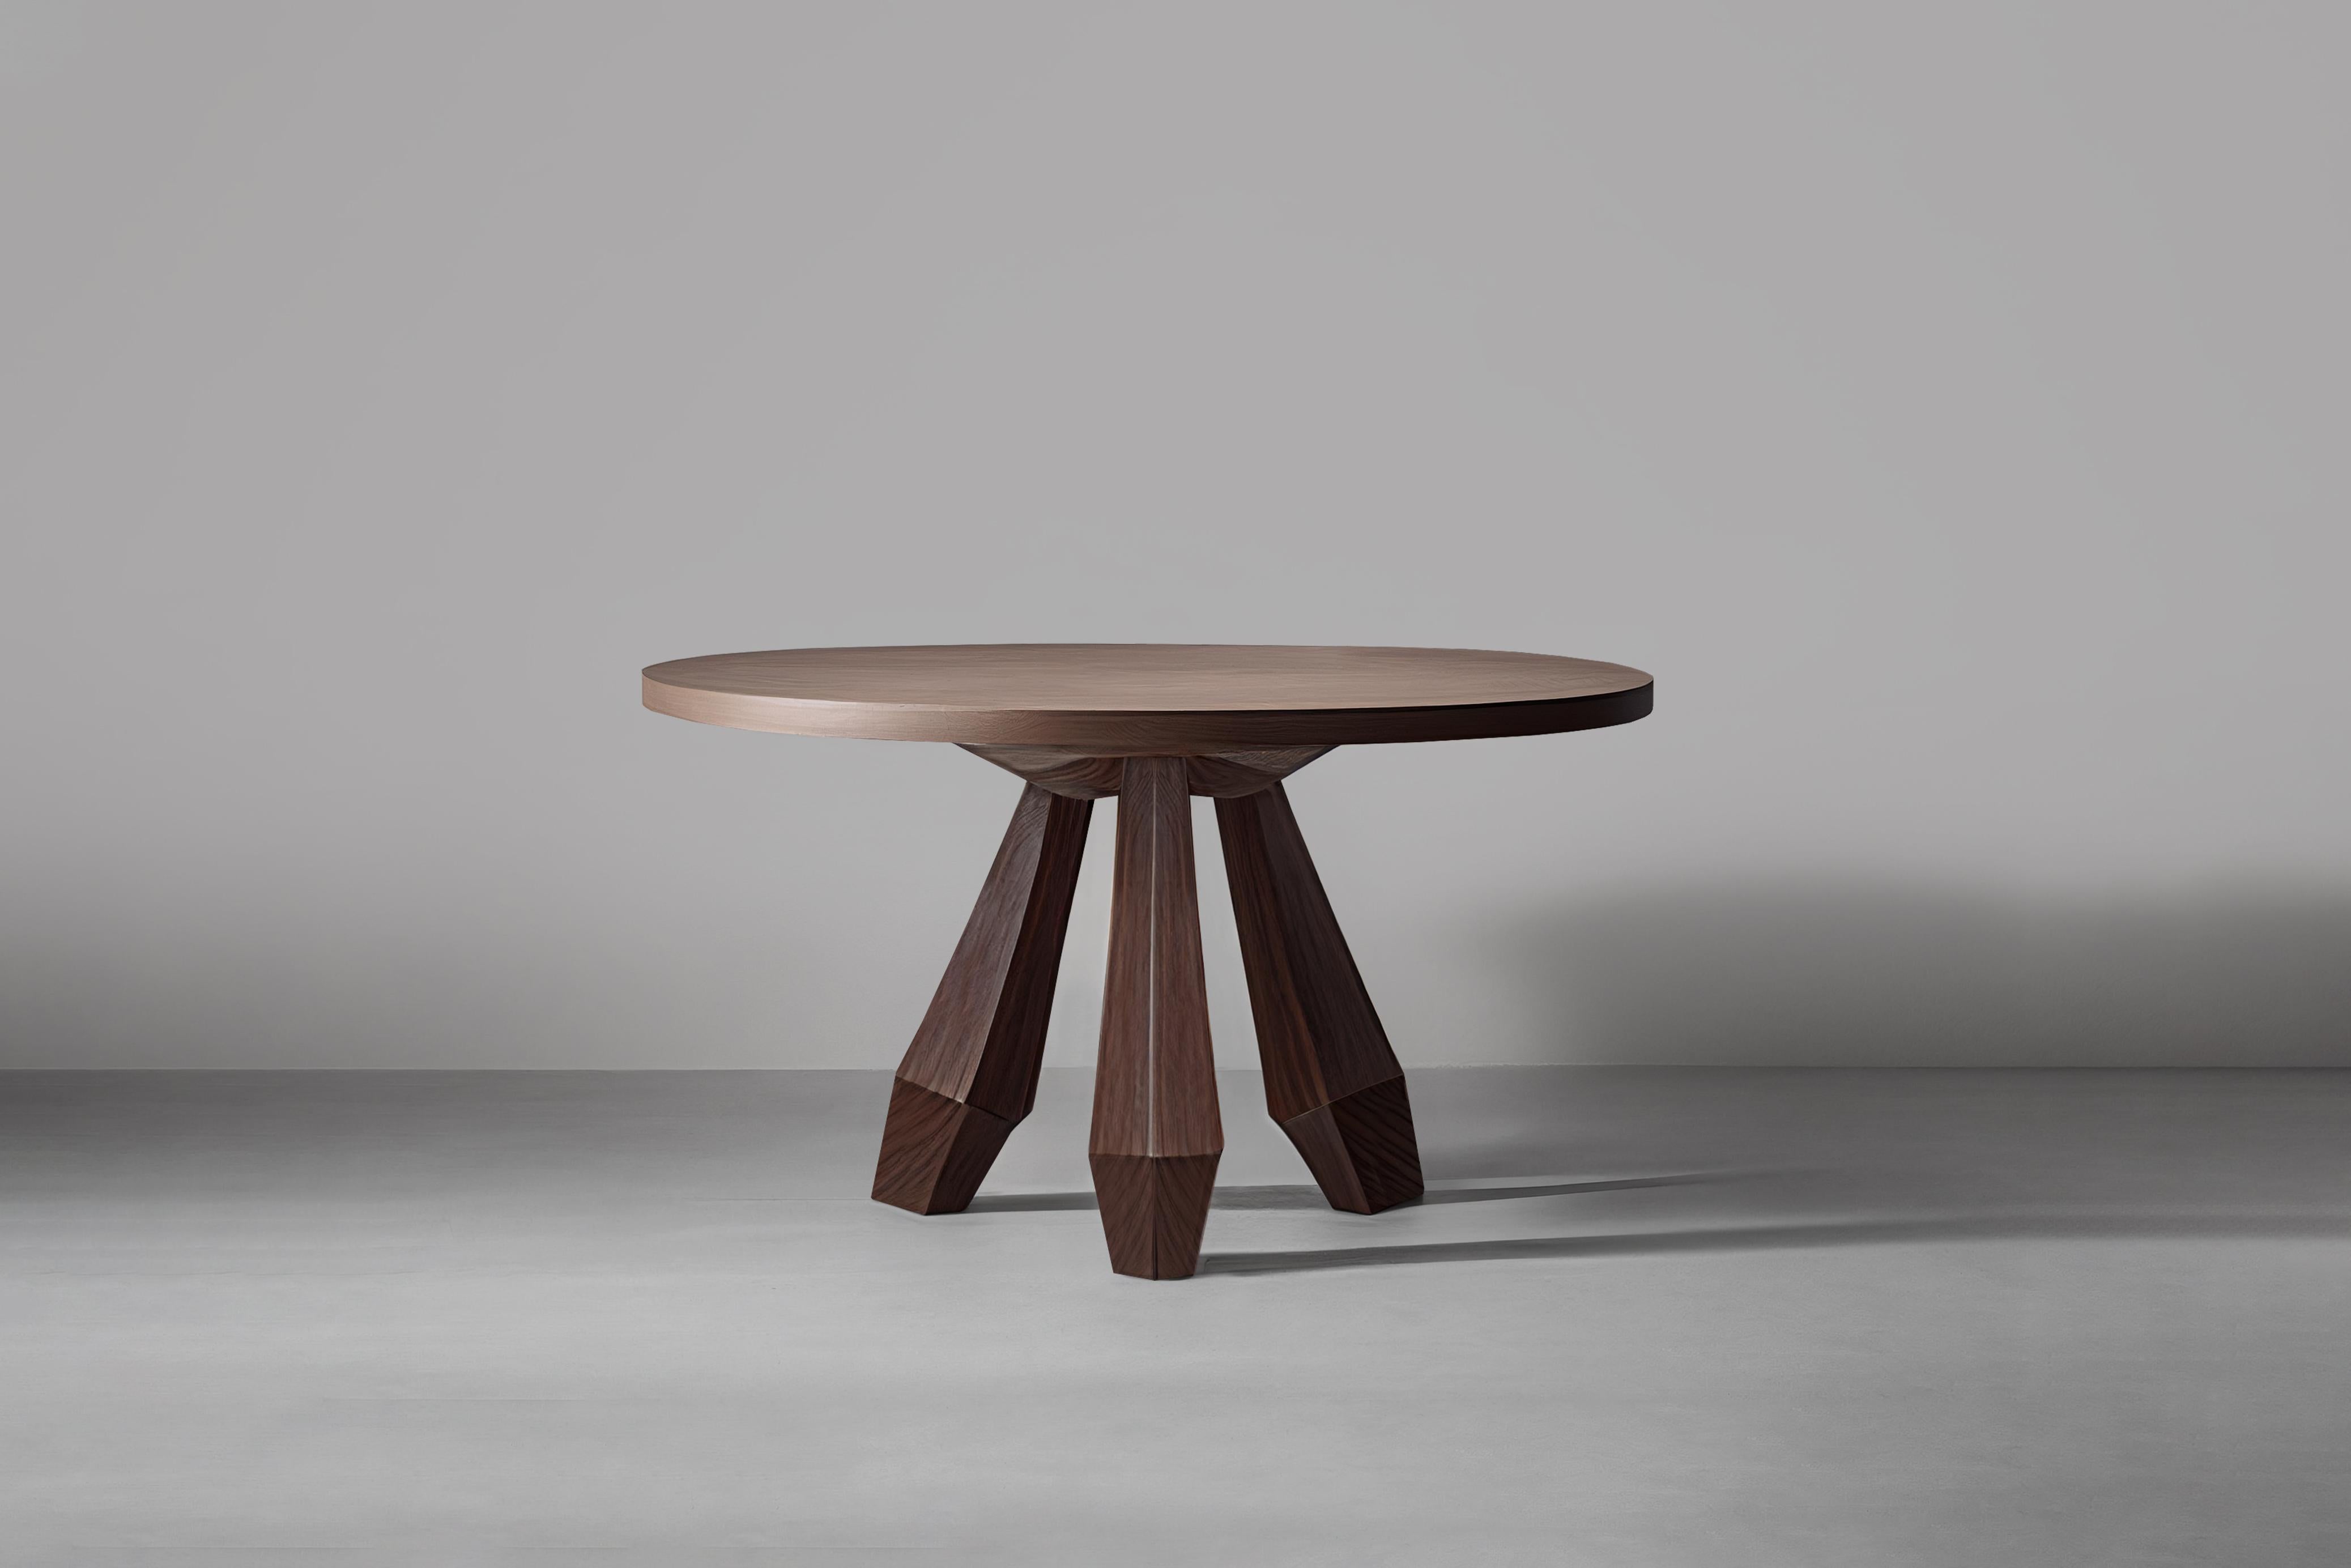 Dining table inspired by Charlotte Perriand's Sandoz stool design by NONO

Take a seat at the dining table inspired by the iconic Sandoz stool by Charlotte Perriand. This table boasts a sleek and Minimalist design that exudes sophistication and